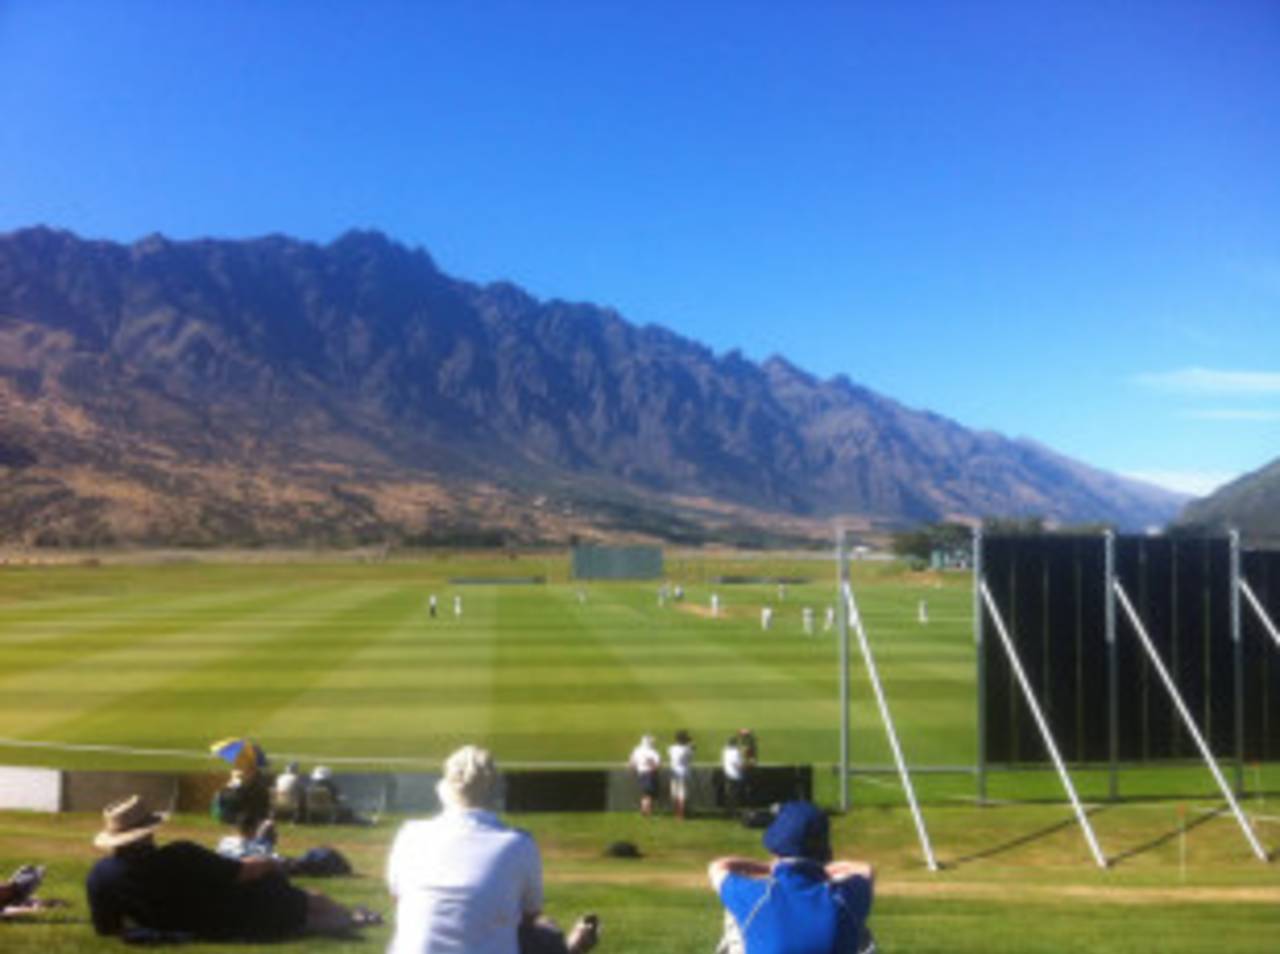 The Queenstown ground, with the Remarkables in the background&nbsp;&nbsp;&bull;&nbsp;&nbsp;Andrew McGlashan/ESPNcricinfo Ltd